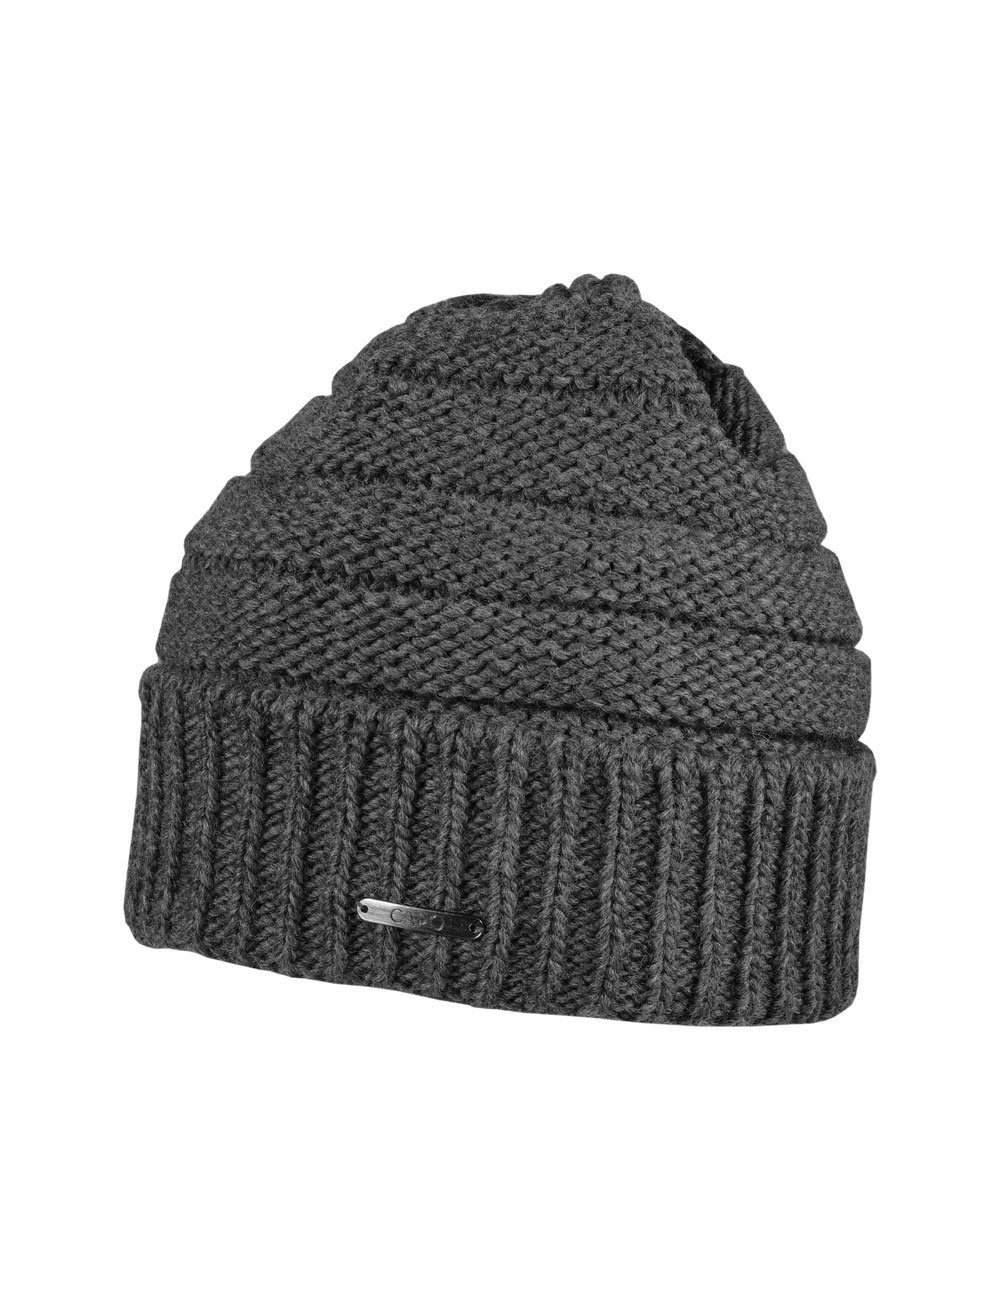 Auslauf CAPO Strickmütze CAPO-PIPER CAP Germany in short Made turn up, fleece knitted cap